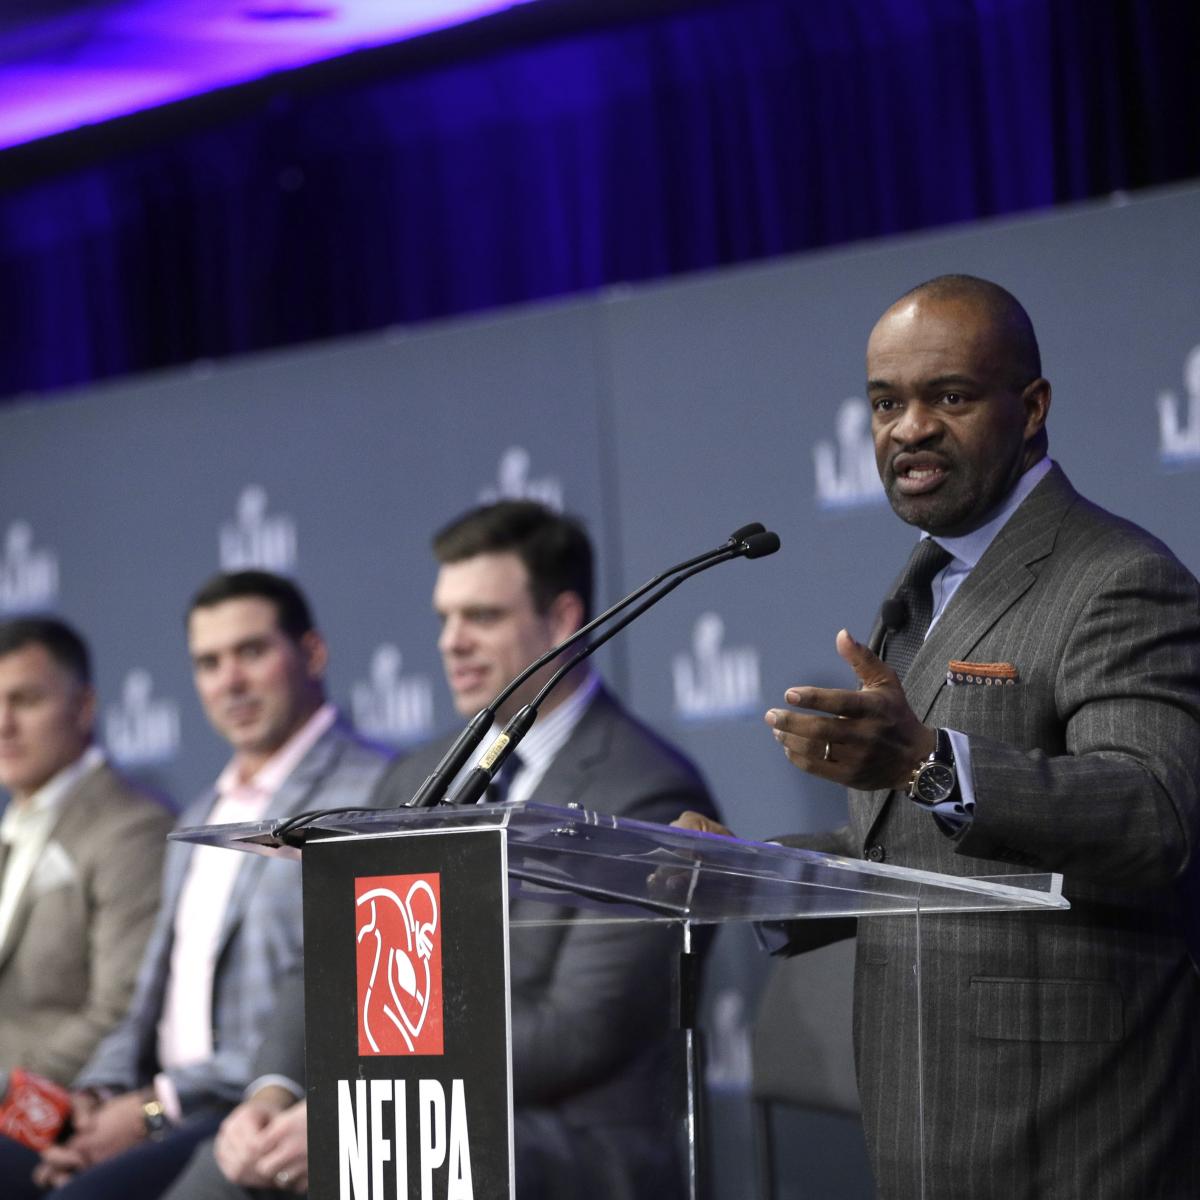 Report: NFL Proposed Cutting Each Team's Player Costs by $40M in NFLPA Proposal